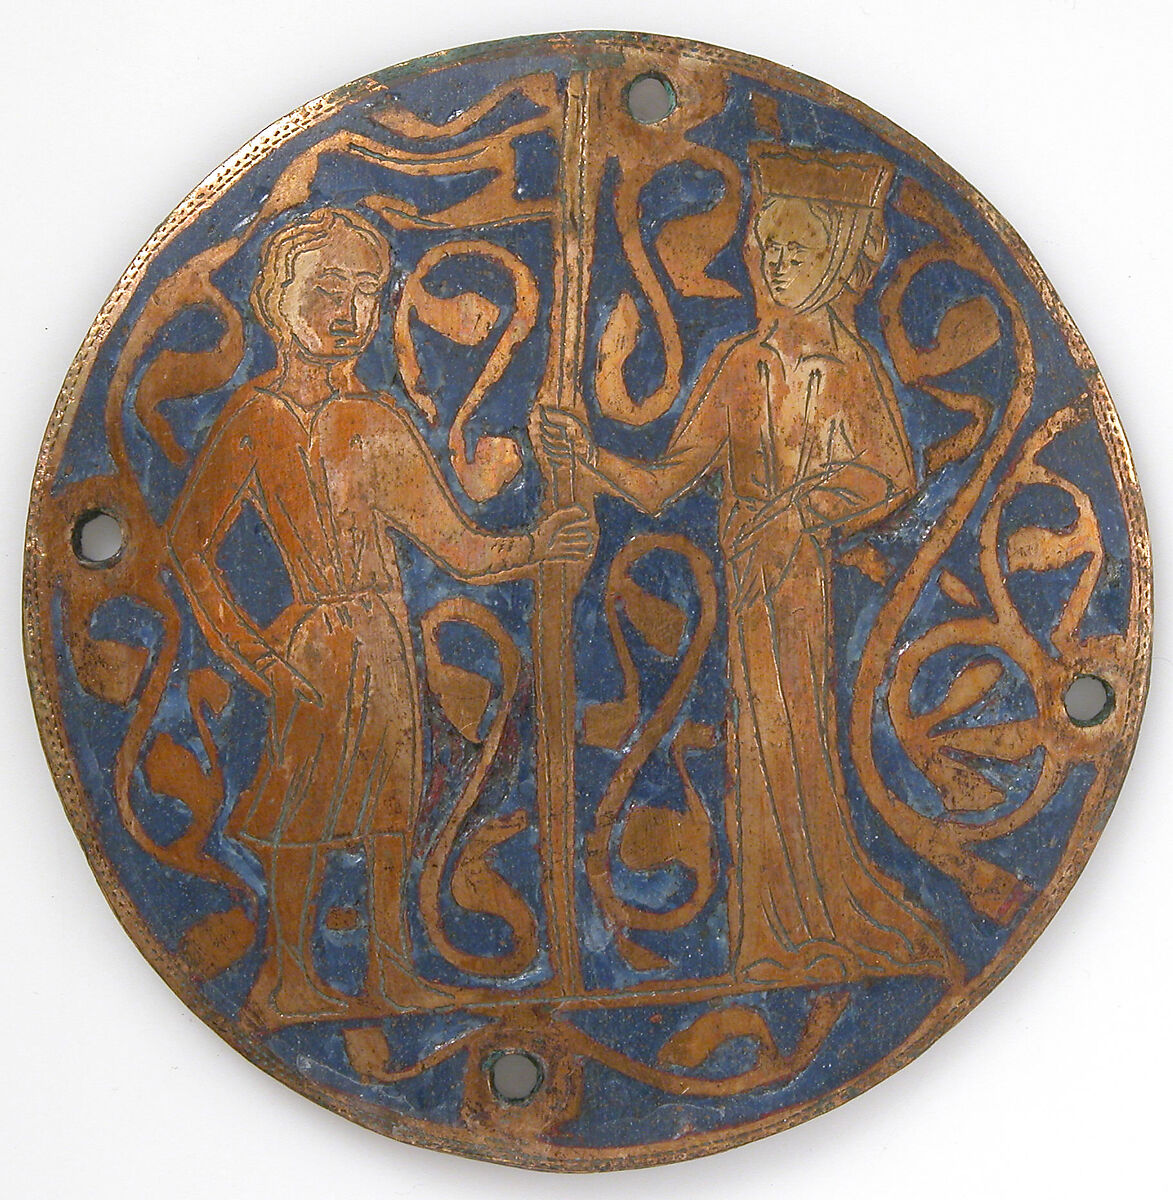 Medallion with man and woman holding standard, Copper: engraved and gilt; champlevé enamel: medium and light blue and white, French 